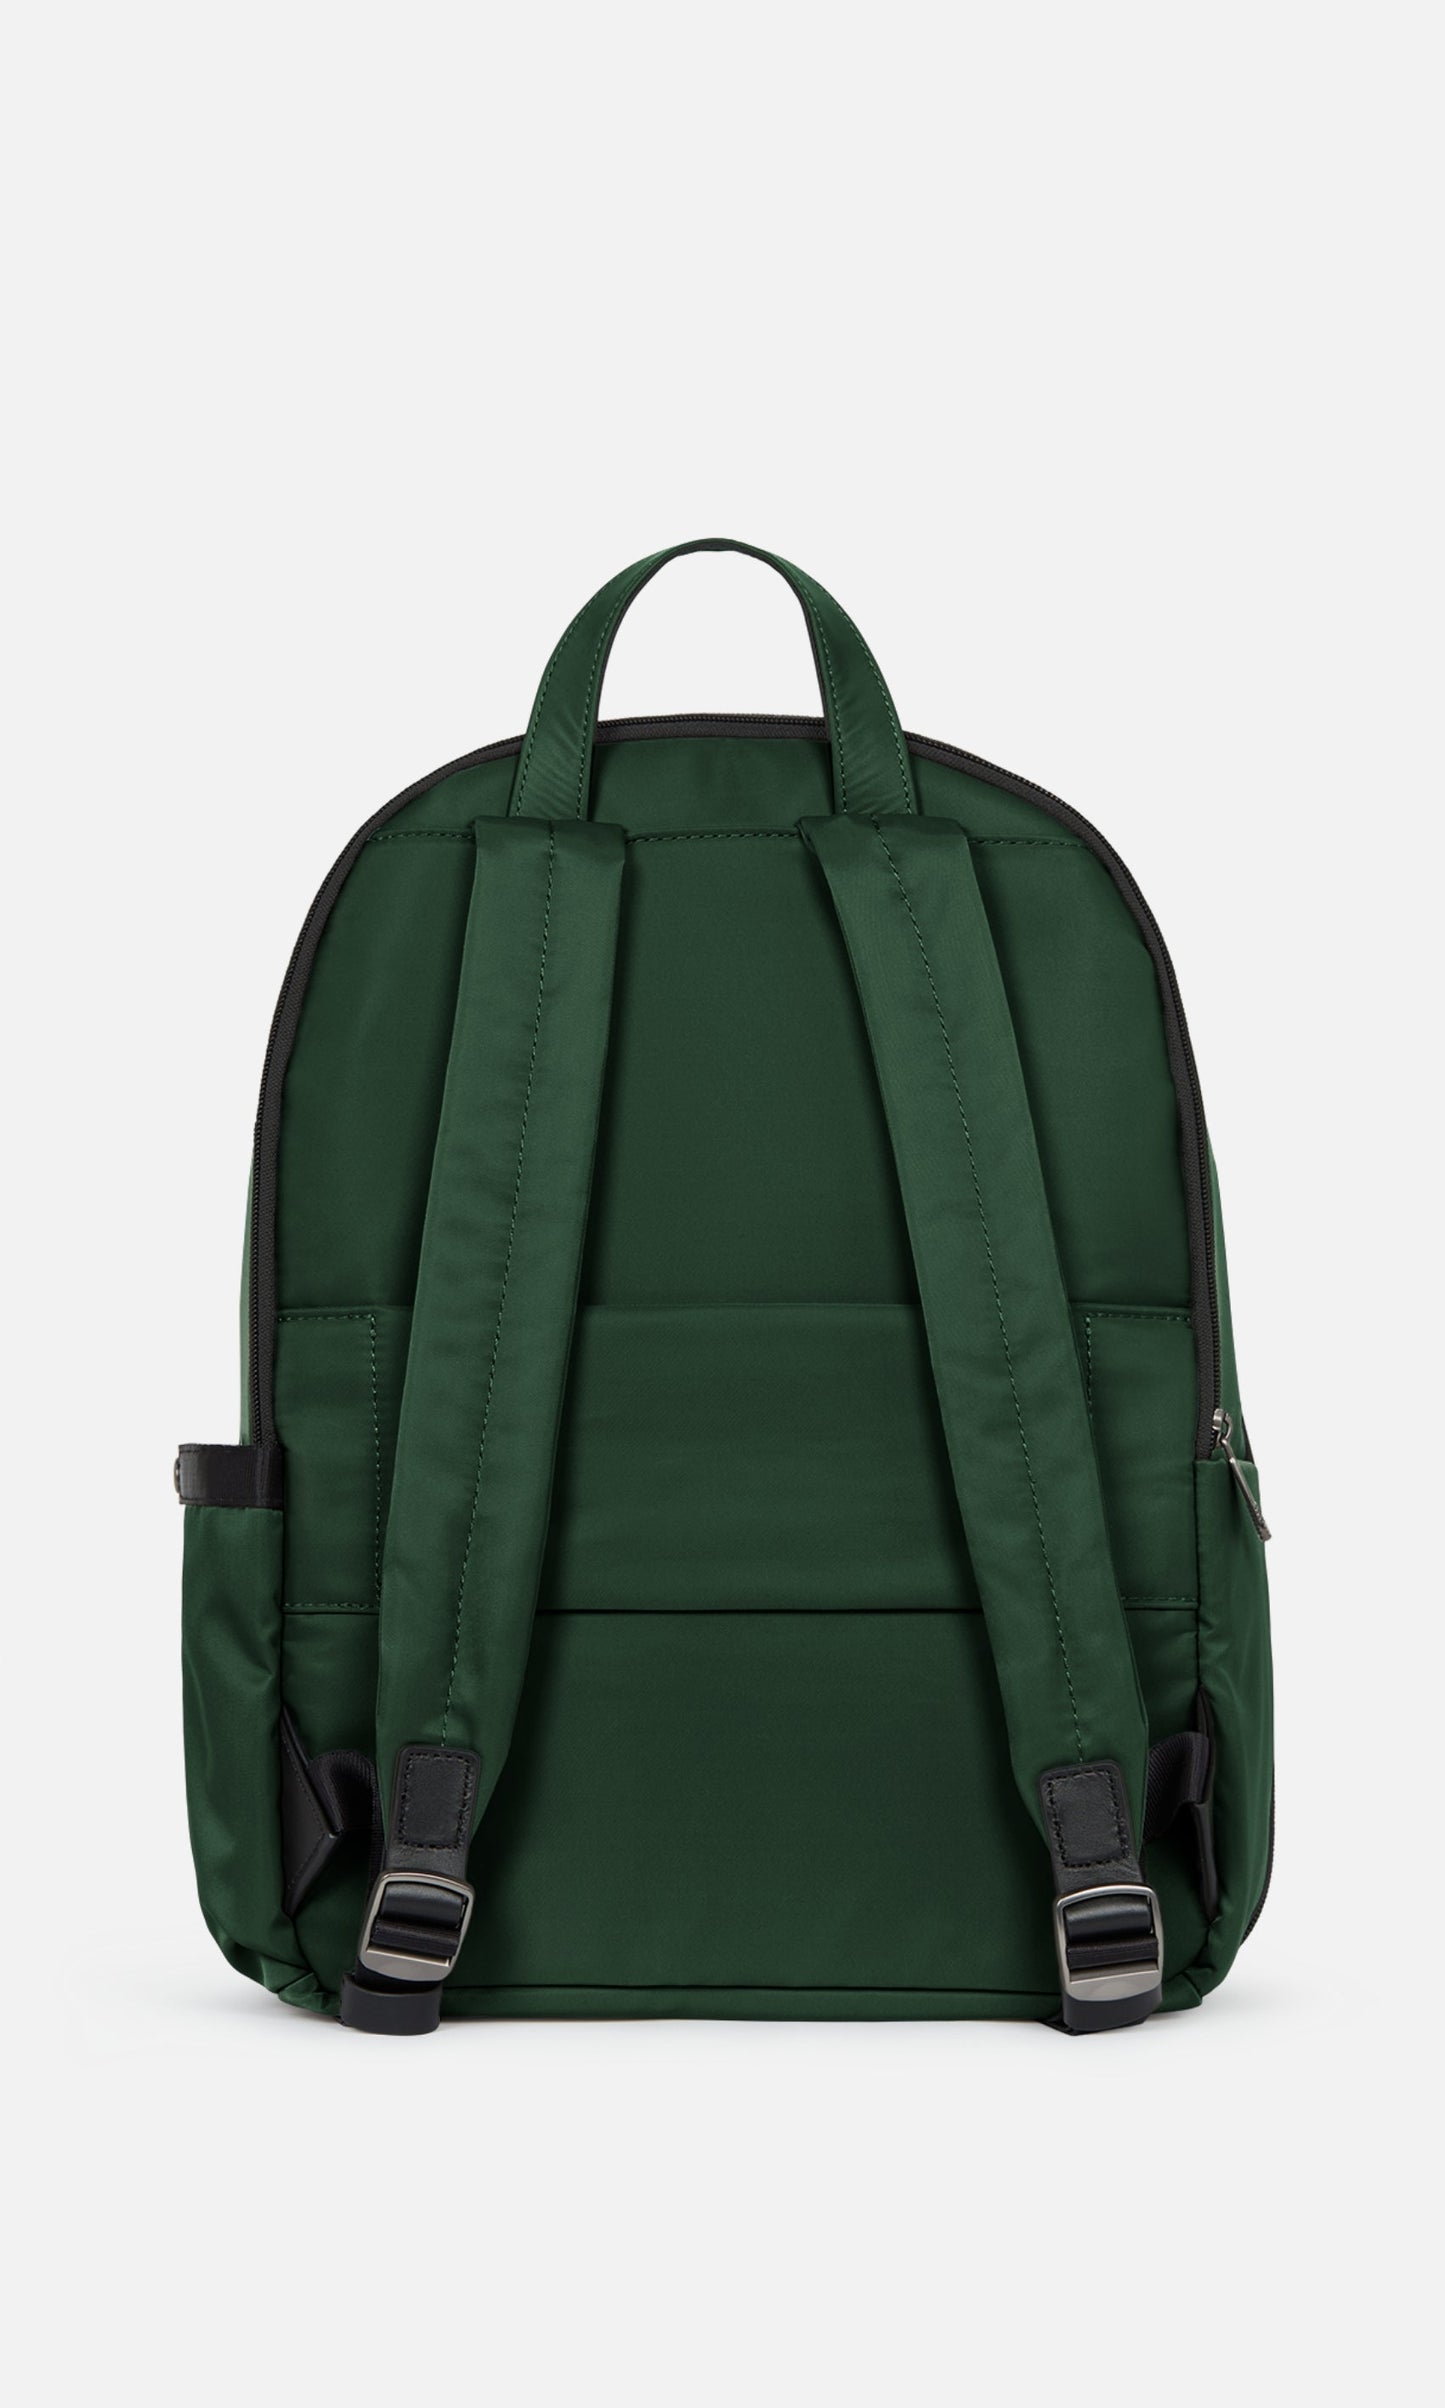 Chelsea backpack in woodland green